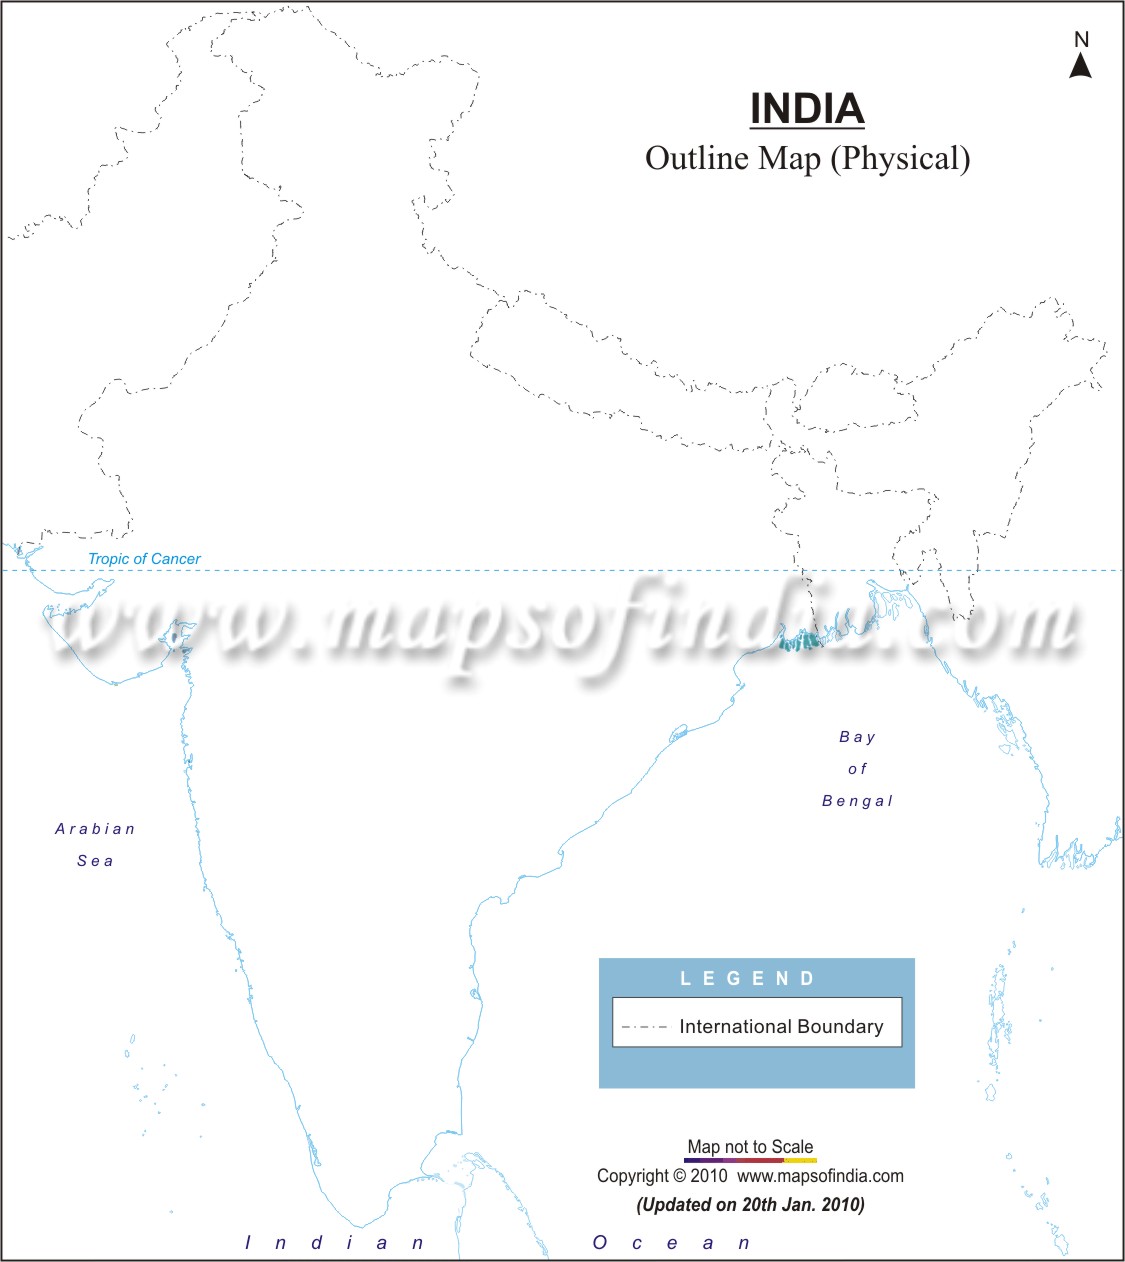 blank images of physical map of india India Physical Map In A4 Size blank images of physical map of india